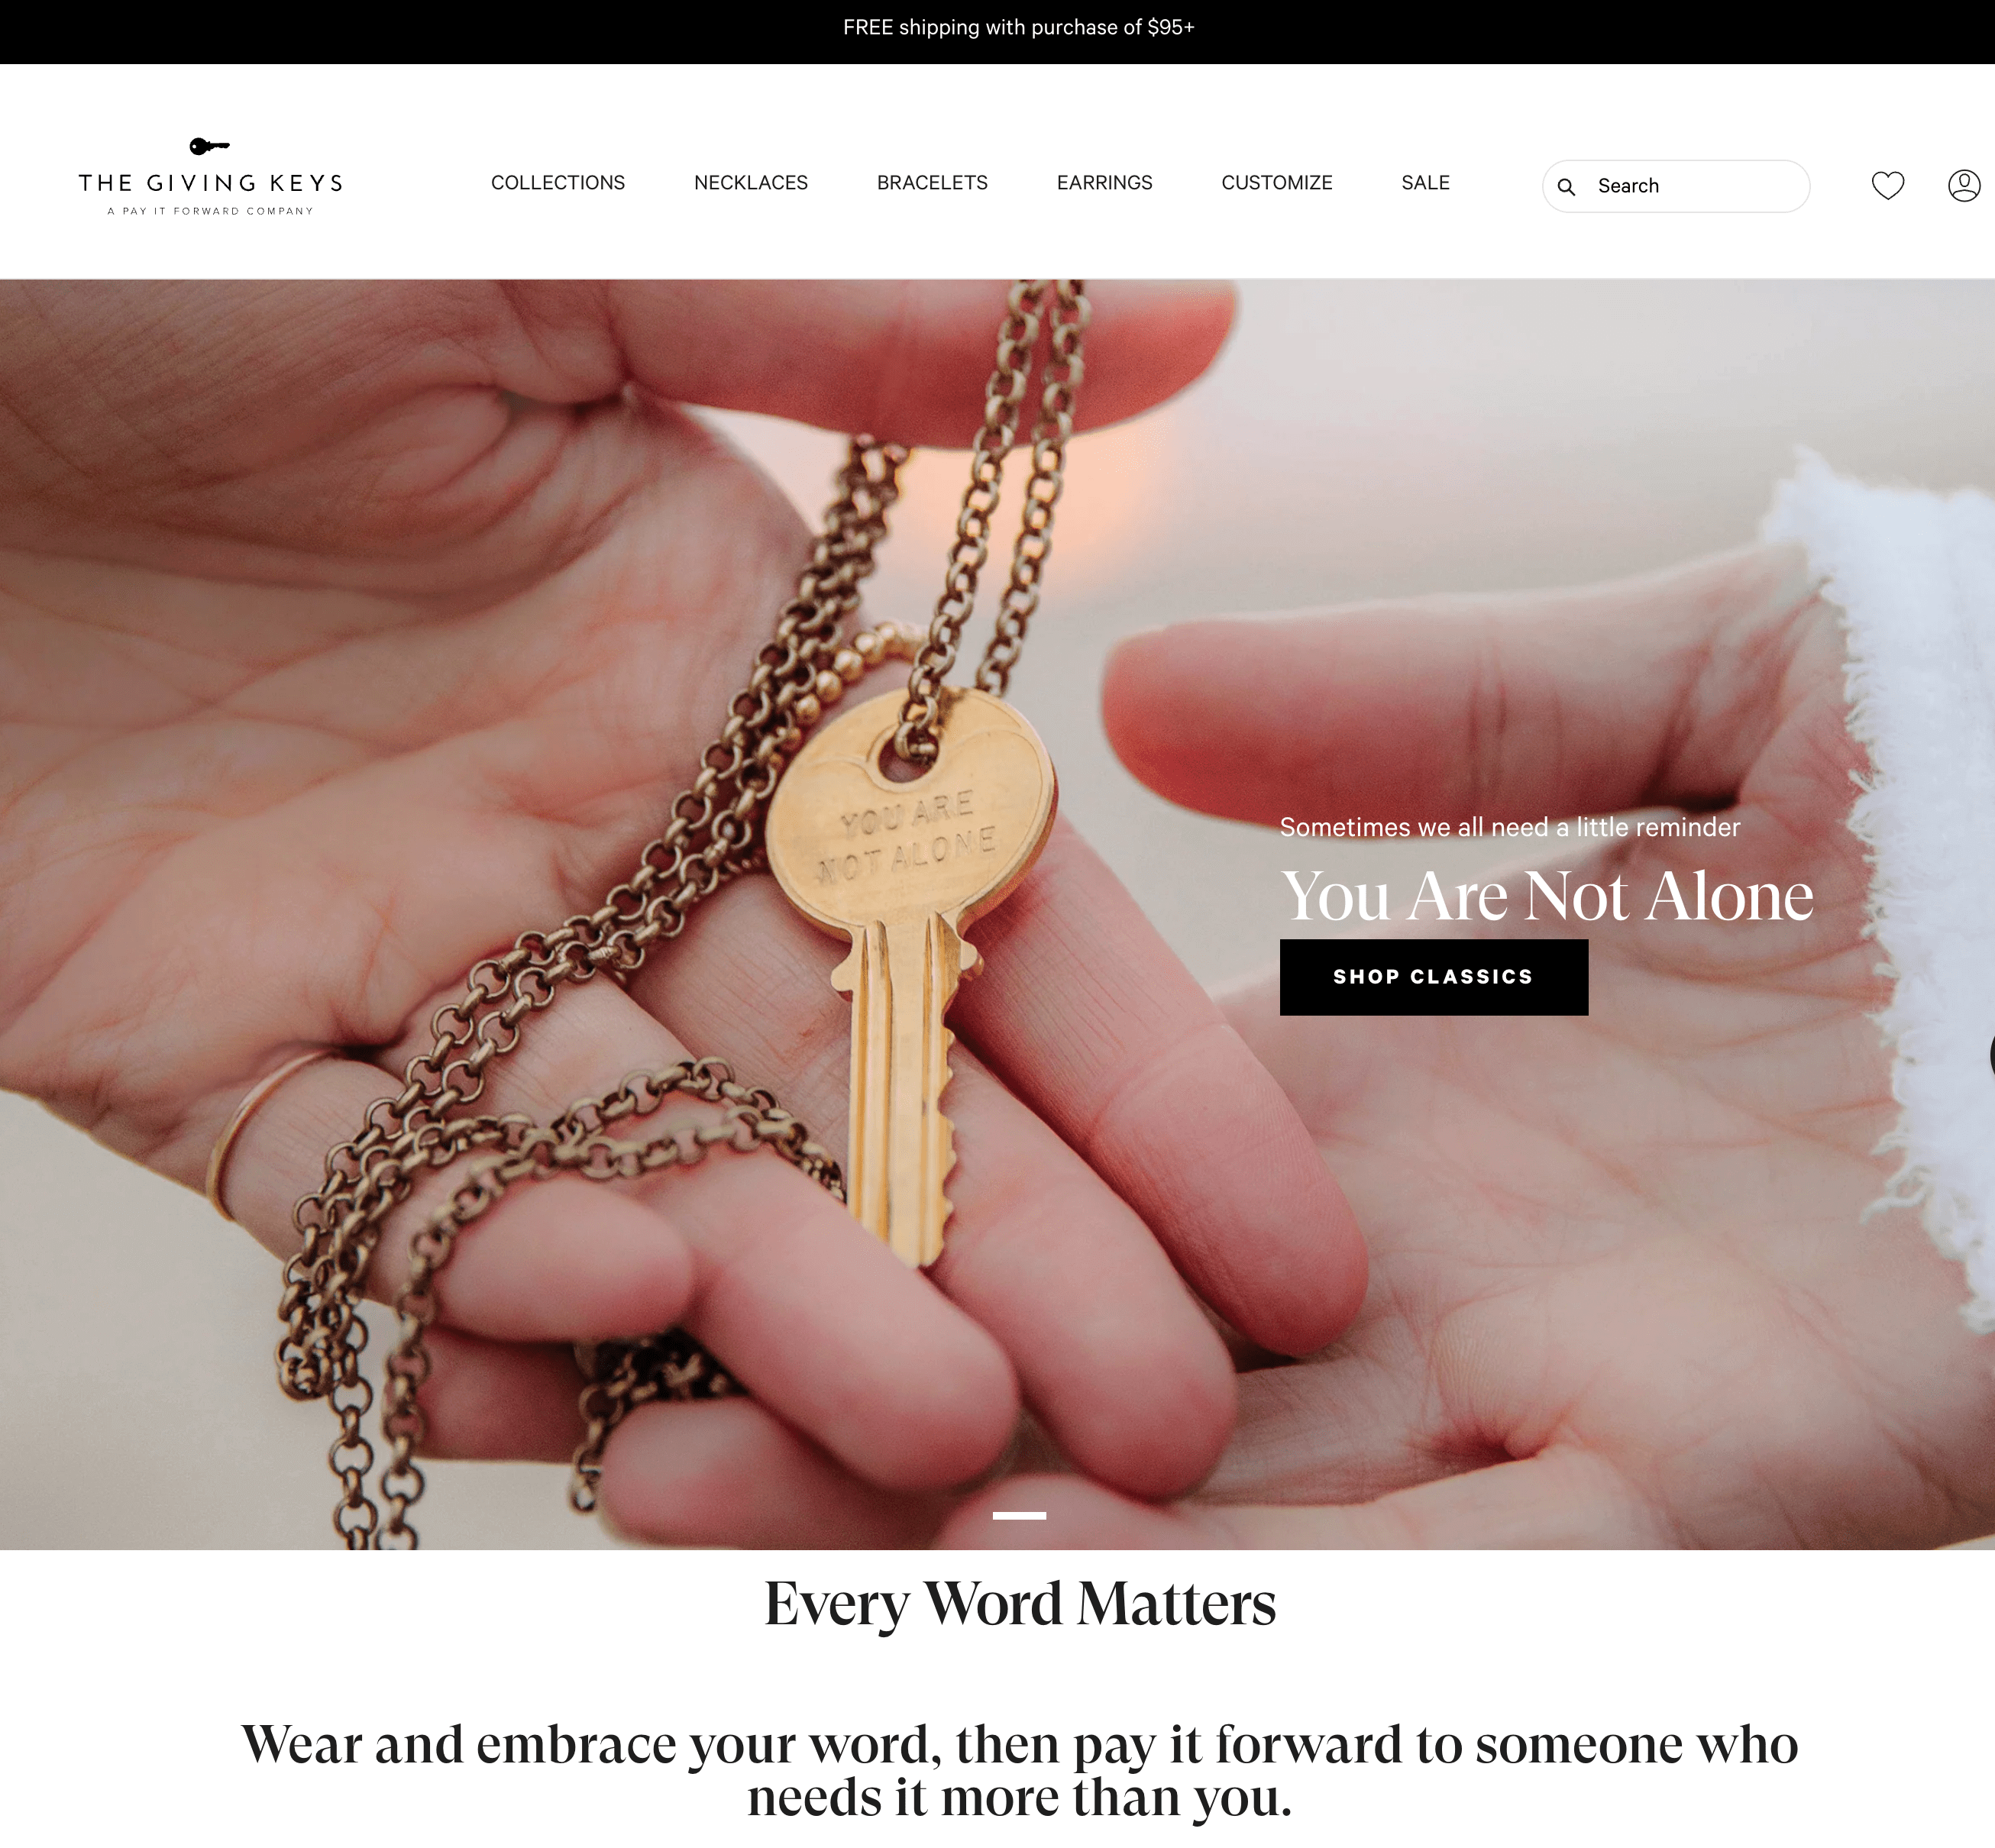 Storytelling Brands–The Giving Keys’ homepage text: Every Word Matters. Wear and embrace your word, then pay it forward to someone who needs it more than you. Above the text is a banner image of a hand placing a gold key necklace engraved with the words: You Are Not Alone, in someone else’s hand. 